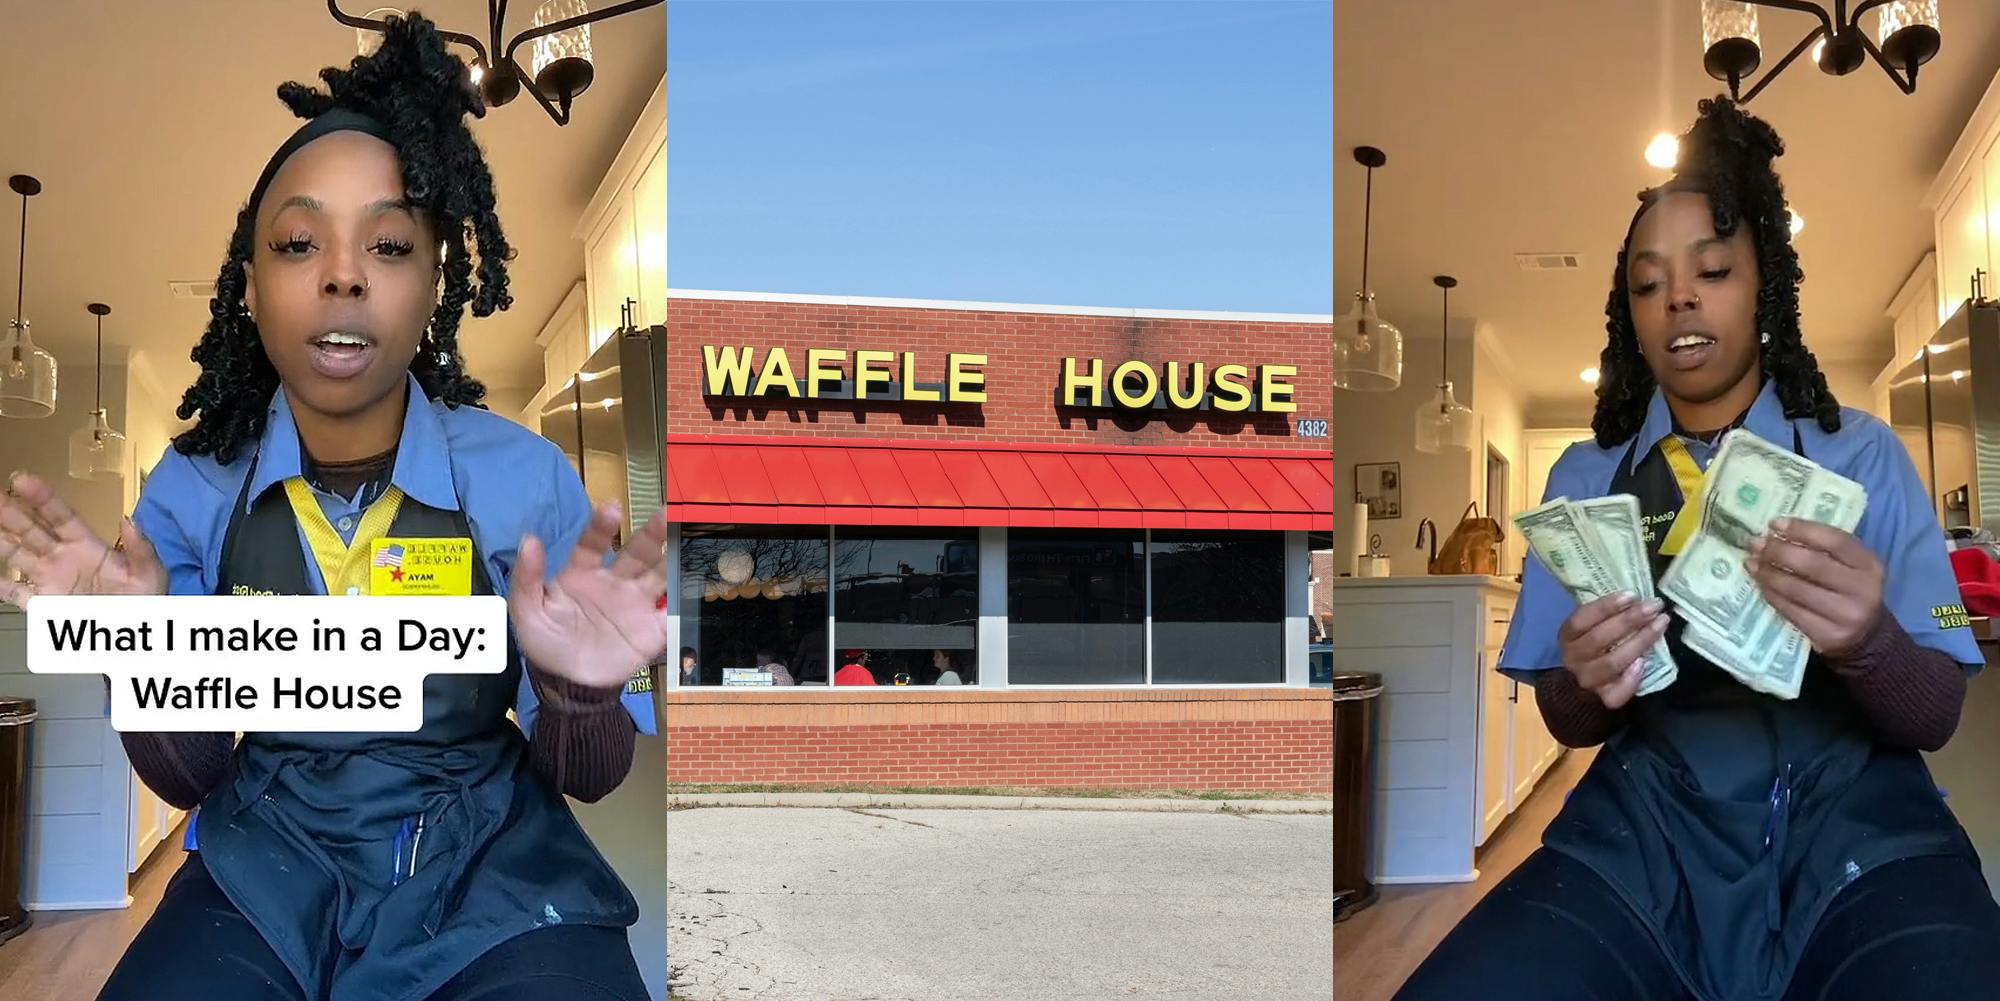 Waffle House worker speaking caption "What I make in a Day: Waffle House" (l) Waffle House building with sign (c) Waffle House worker speaking counting cash (r)